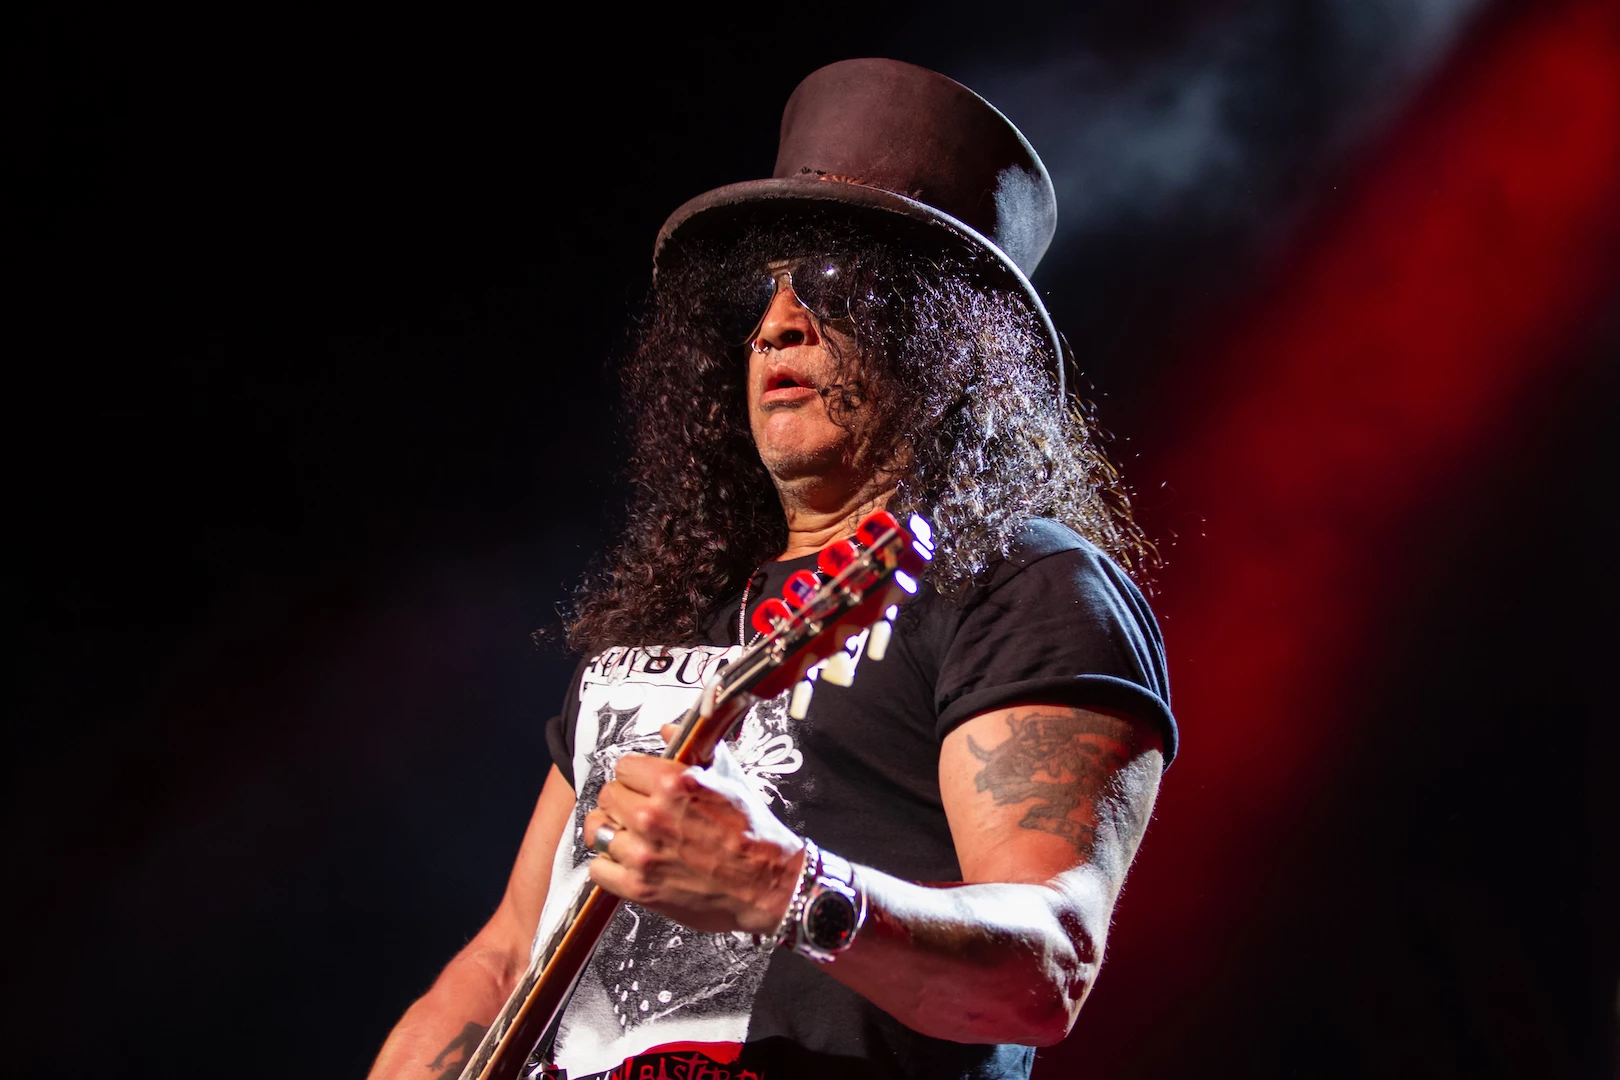 Slash - 'There's New GN'R Material Coming Out As We Speak'